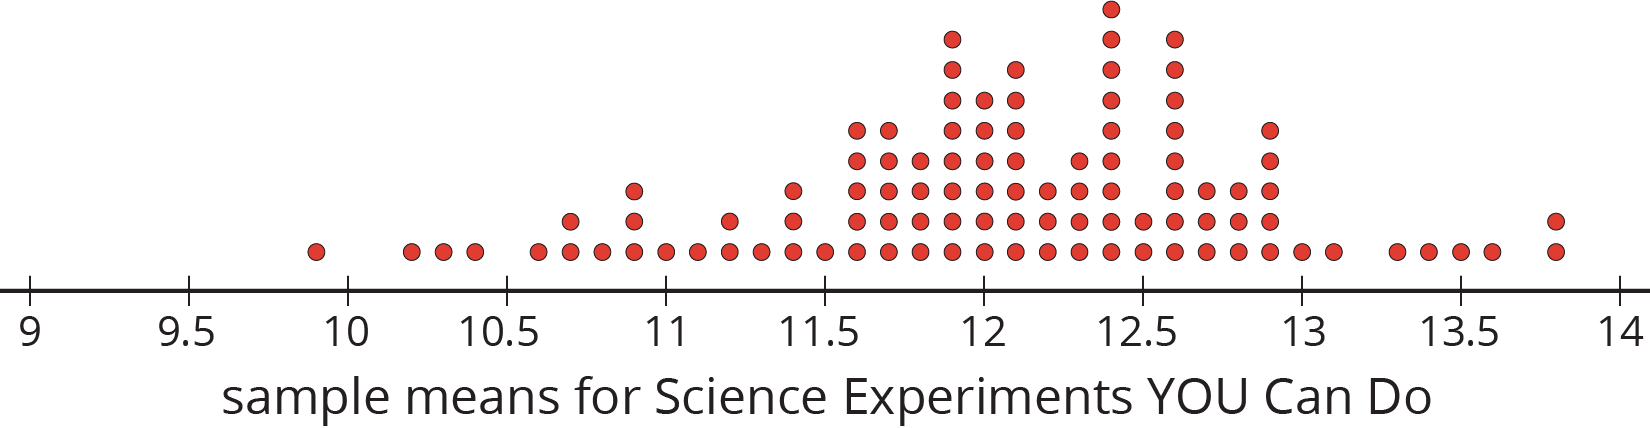 A dot plot for “sample means for Science Experiments YOU Can Do” with the numbers 9 through 14, in increments of zero point 5, indicated. The data are as follows: 9 point 8 years old, 1 dot. 10 point 2 years old, 1 dot. 10 point 3 years old, 1 dot. 10 point 4 years old, 1 dot. 10 point 6 years old, 1 dot. 10 point 7 years old, 2 dots. 10 point 8 years old, 1 dot. 10 point 9 years old, 3 dots. 11 years old, 1 dot. 11 point 1 years old, 1 dot. 11 point 2 years old, 2 dots. 11 point 3 years old, 1 dot. 11 point 4 years old, 3 dots. 11 point 5 years old, 1 dot. 11 point 6 years old, 5 dots. 11 point 7 years old, 5 dots. 11 point 8 years old, 4 dots. 11 point 9 years old, 8 dots. 12 years old, 6 dots. 12 point 1 years old, 7 dots. 12 point 2 years old, 3 dots. 12 point 3 years old, 4 dots. 12 point 4 years old, 9 dots. 12 point 5 years old, 2 dots. 12 point 6 years old, 8 dots. 12 point 7 years old, 3 dots. 12 point 8 years old, 3 dots. 12 point 9 years old, 5 dots. 13 years old, 1 dot. 13 point 1 years old, 1 dot. 13 point 3 years old, 1 dot. 13 point 4 years old, 1 dot. 13 point 5 years old, 1 dot. 13 point 6 years old, 1 dot. 13 point 8 years old, 2 dots.